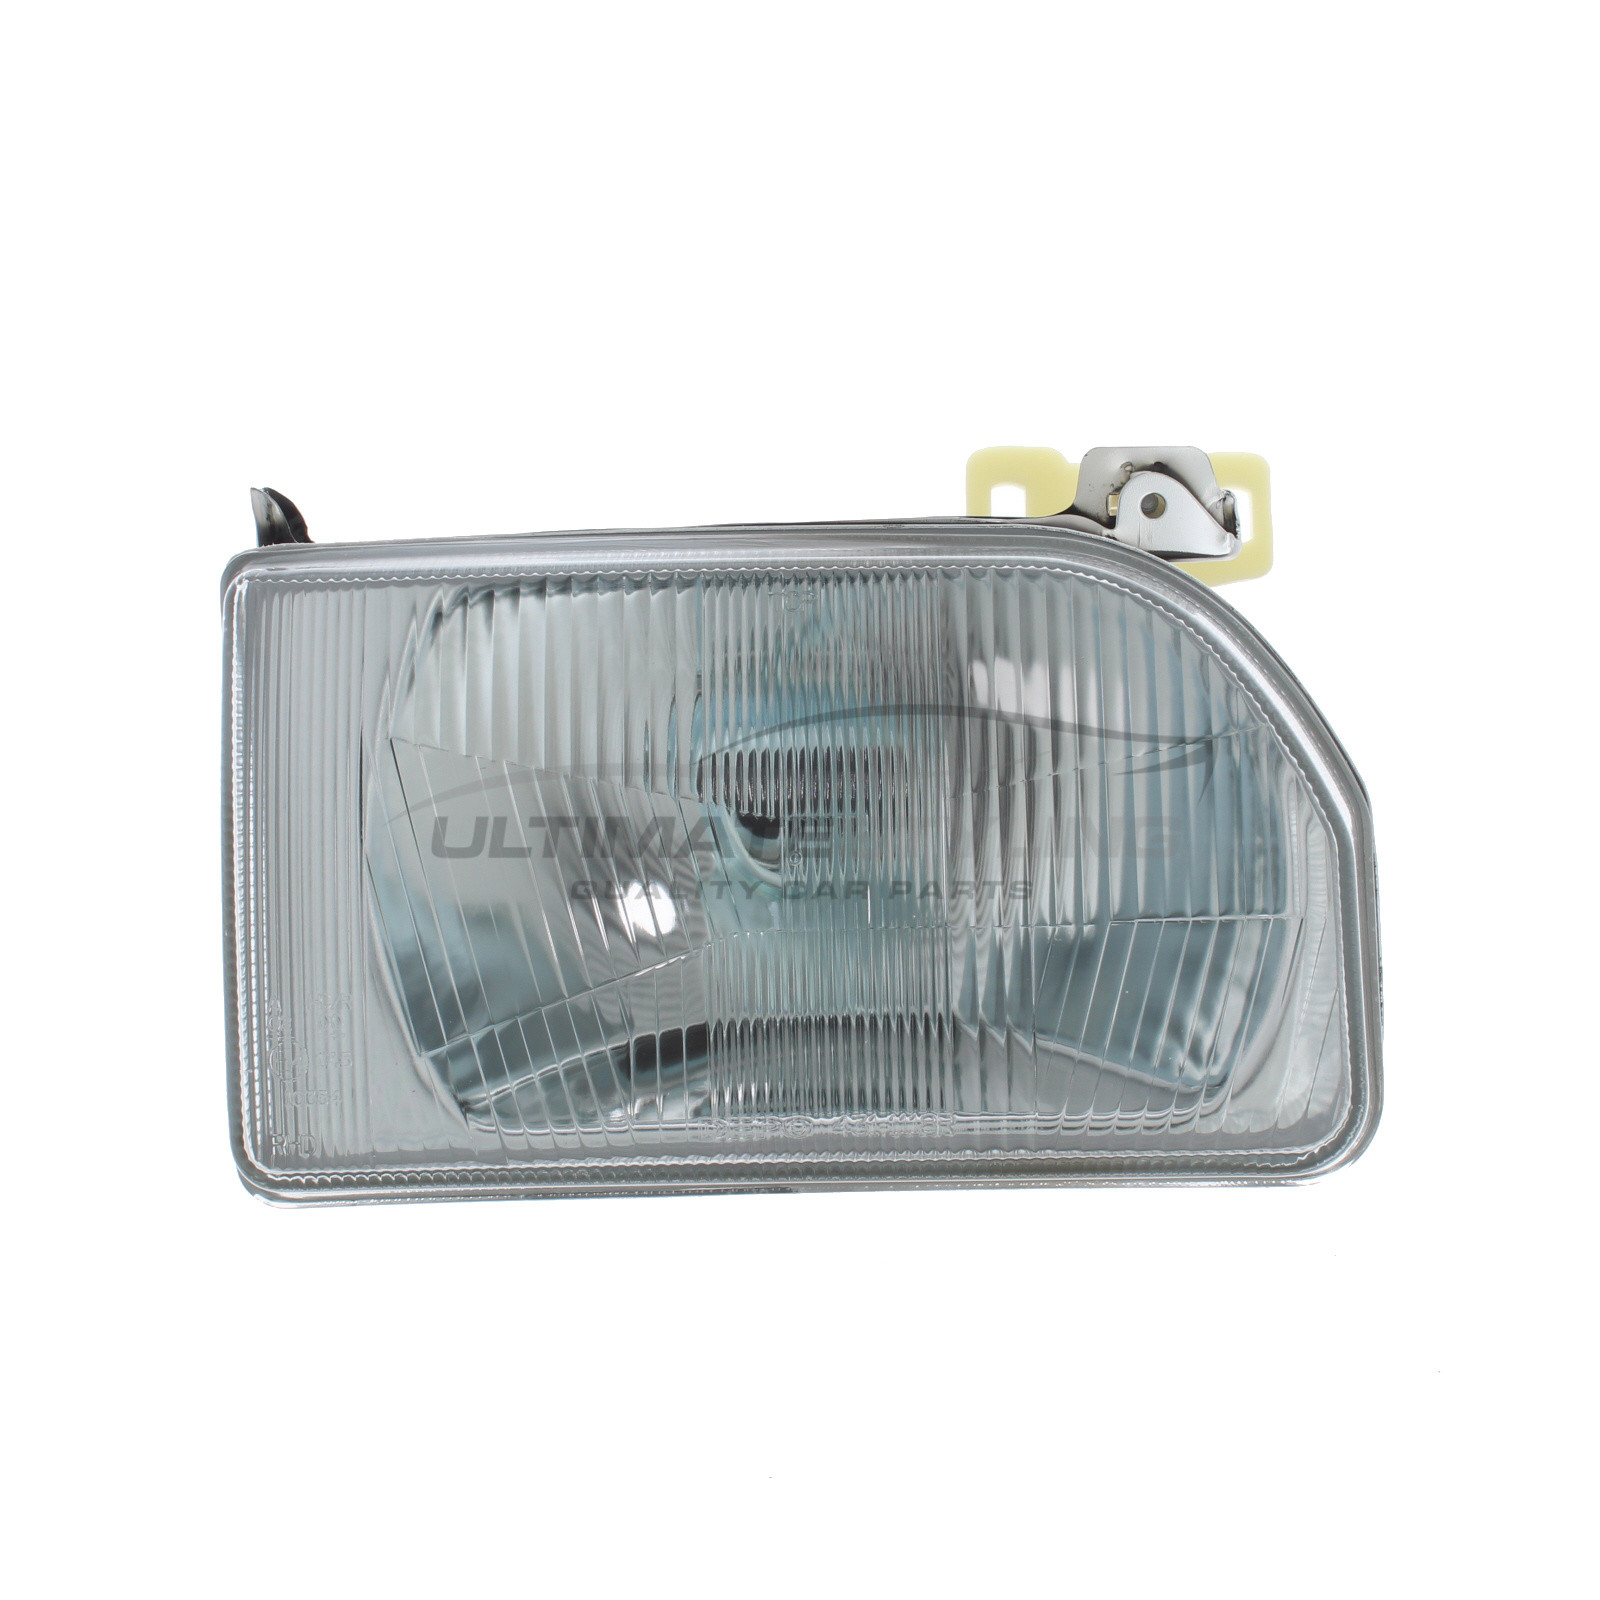 Headlight / Headlamp for Ford Orion